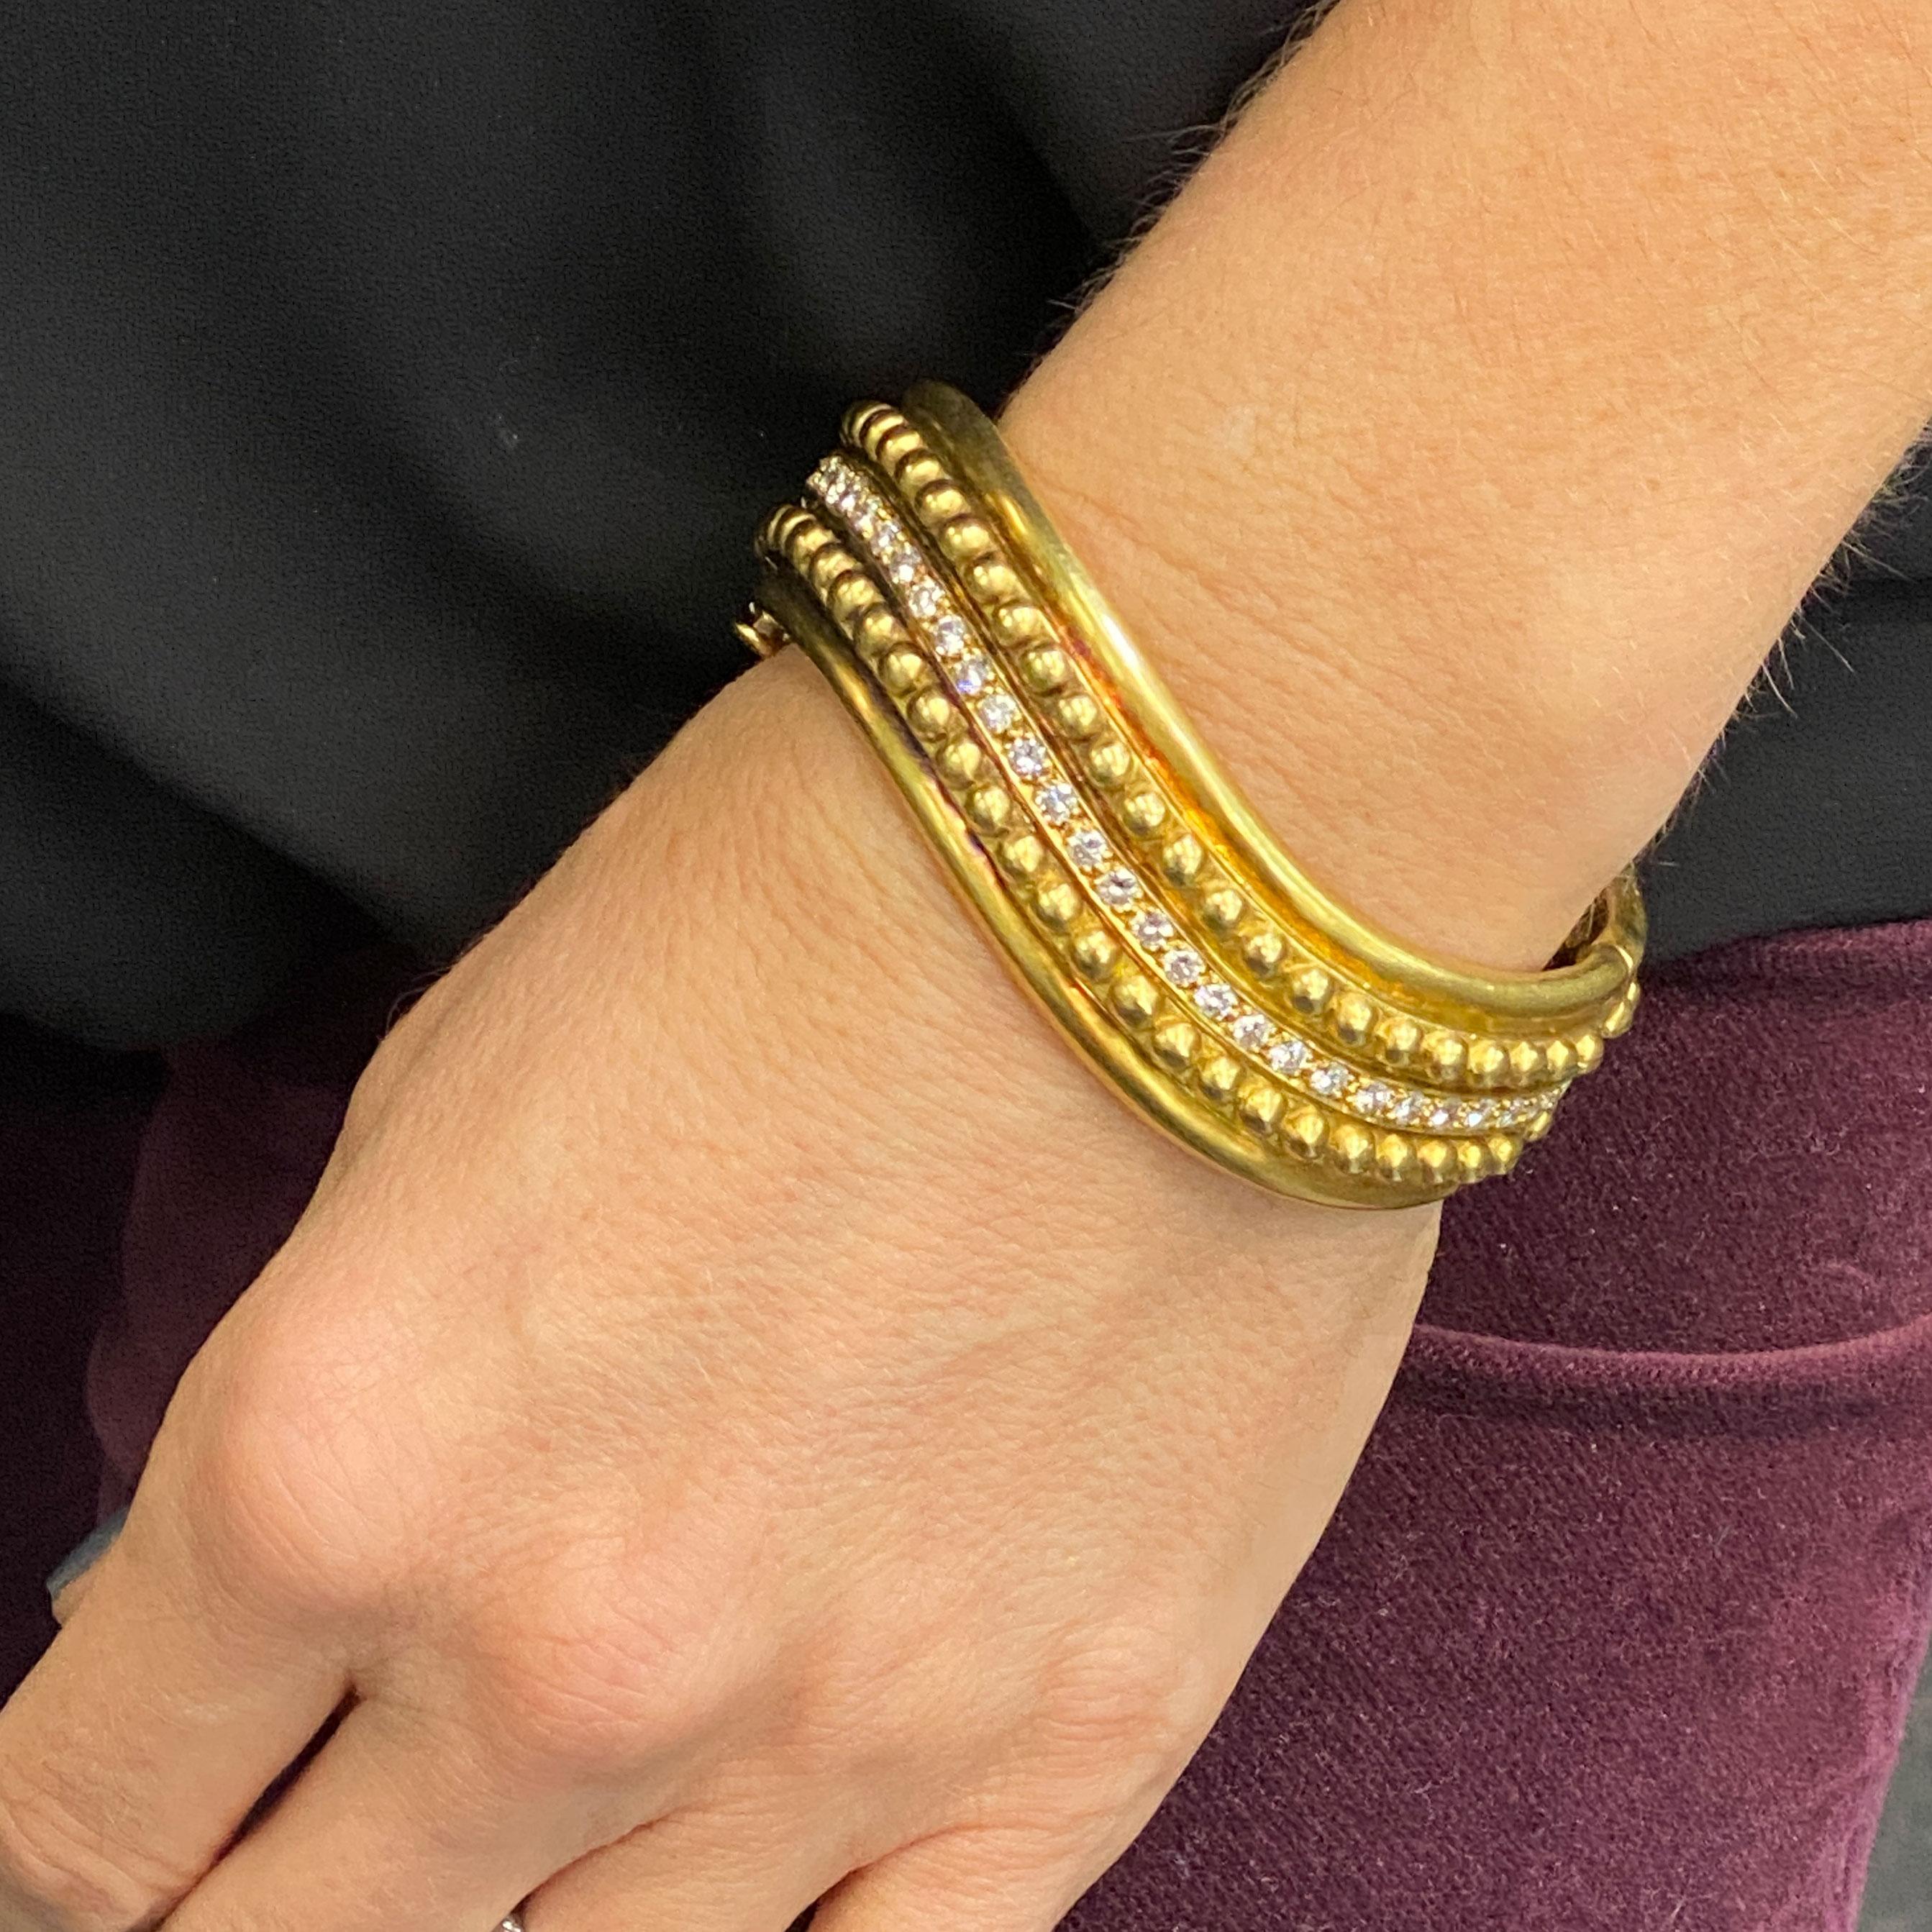 Exquisite satin finished 18 karat yellow gold hinged bangle featuring 30 round brilliant cut white diamonds (2.40 CTW) graded F-G color and VS clarity. The solid textured bangle measures .75 inches in width and approximately 7 inches in